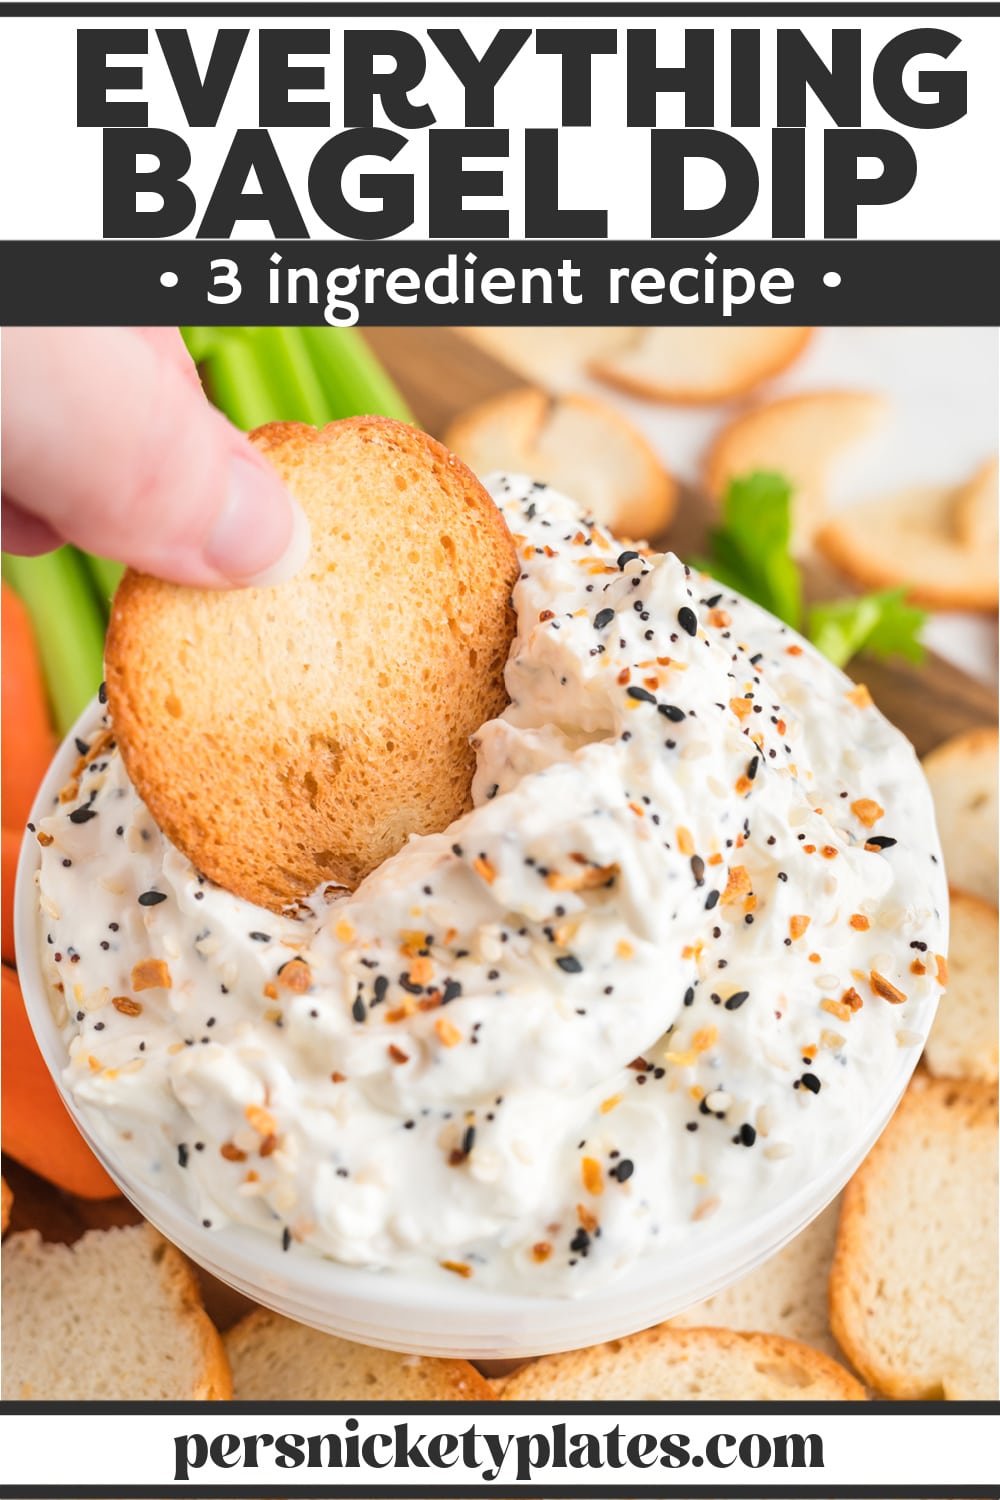 This 3-ingredient Everything Bagel Dip can be whipped up in minutes and served cold! It's got the garlicky, earthy flavors of everything bagel seasoning in a thick, creamy dip, perfect for dipping crackers, chips, bread, and veggies! | www.persnicketyplates.com